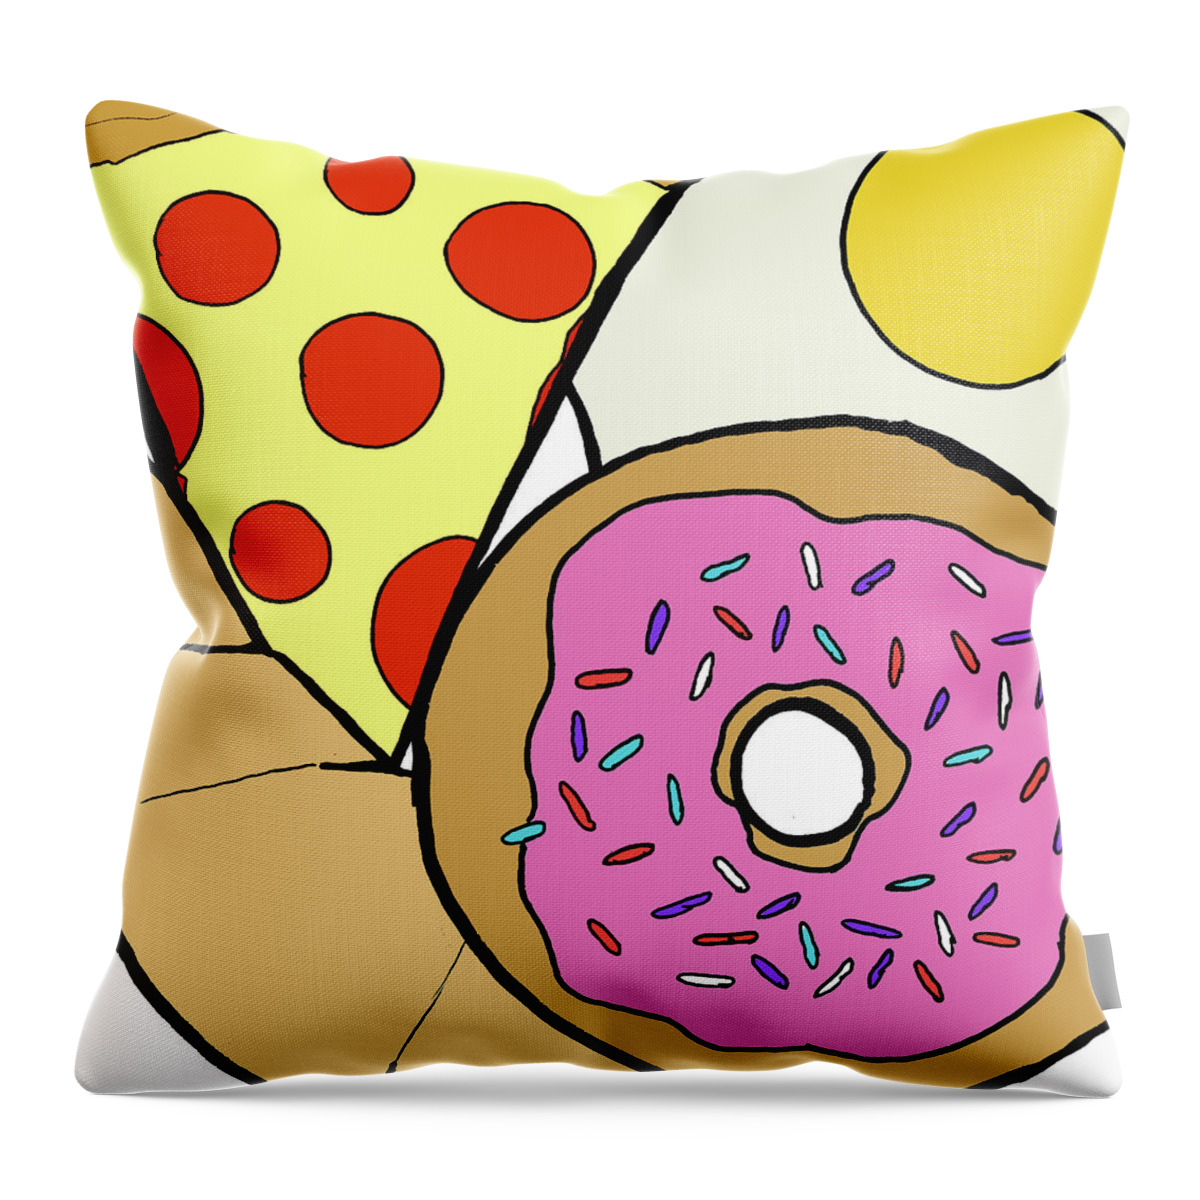 Snack Throw Pillow featuring the mixed media Snack Food #1 by Hugo Edwins